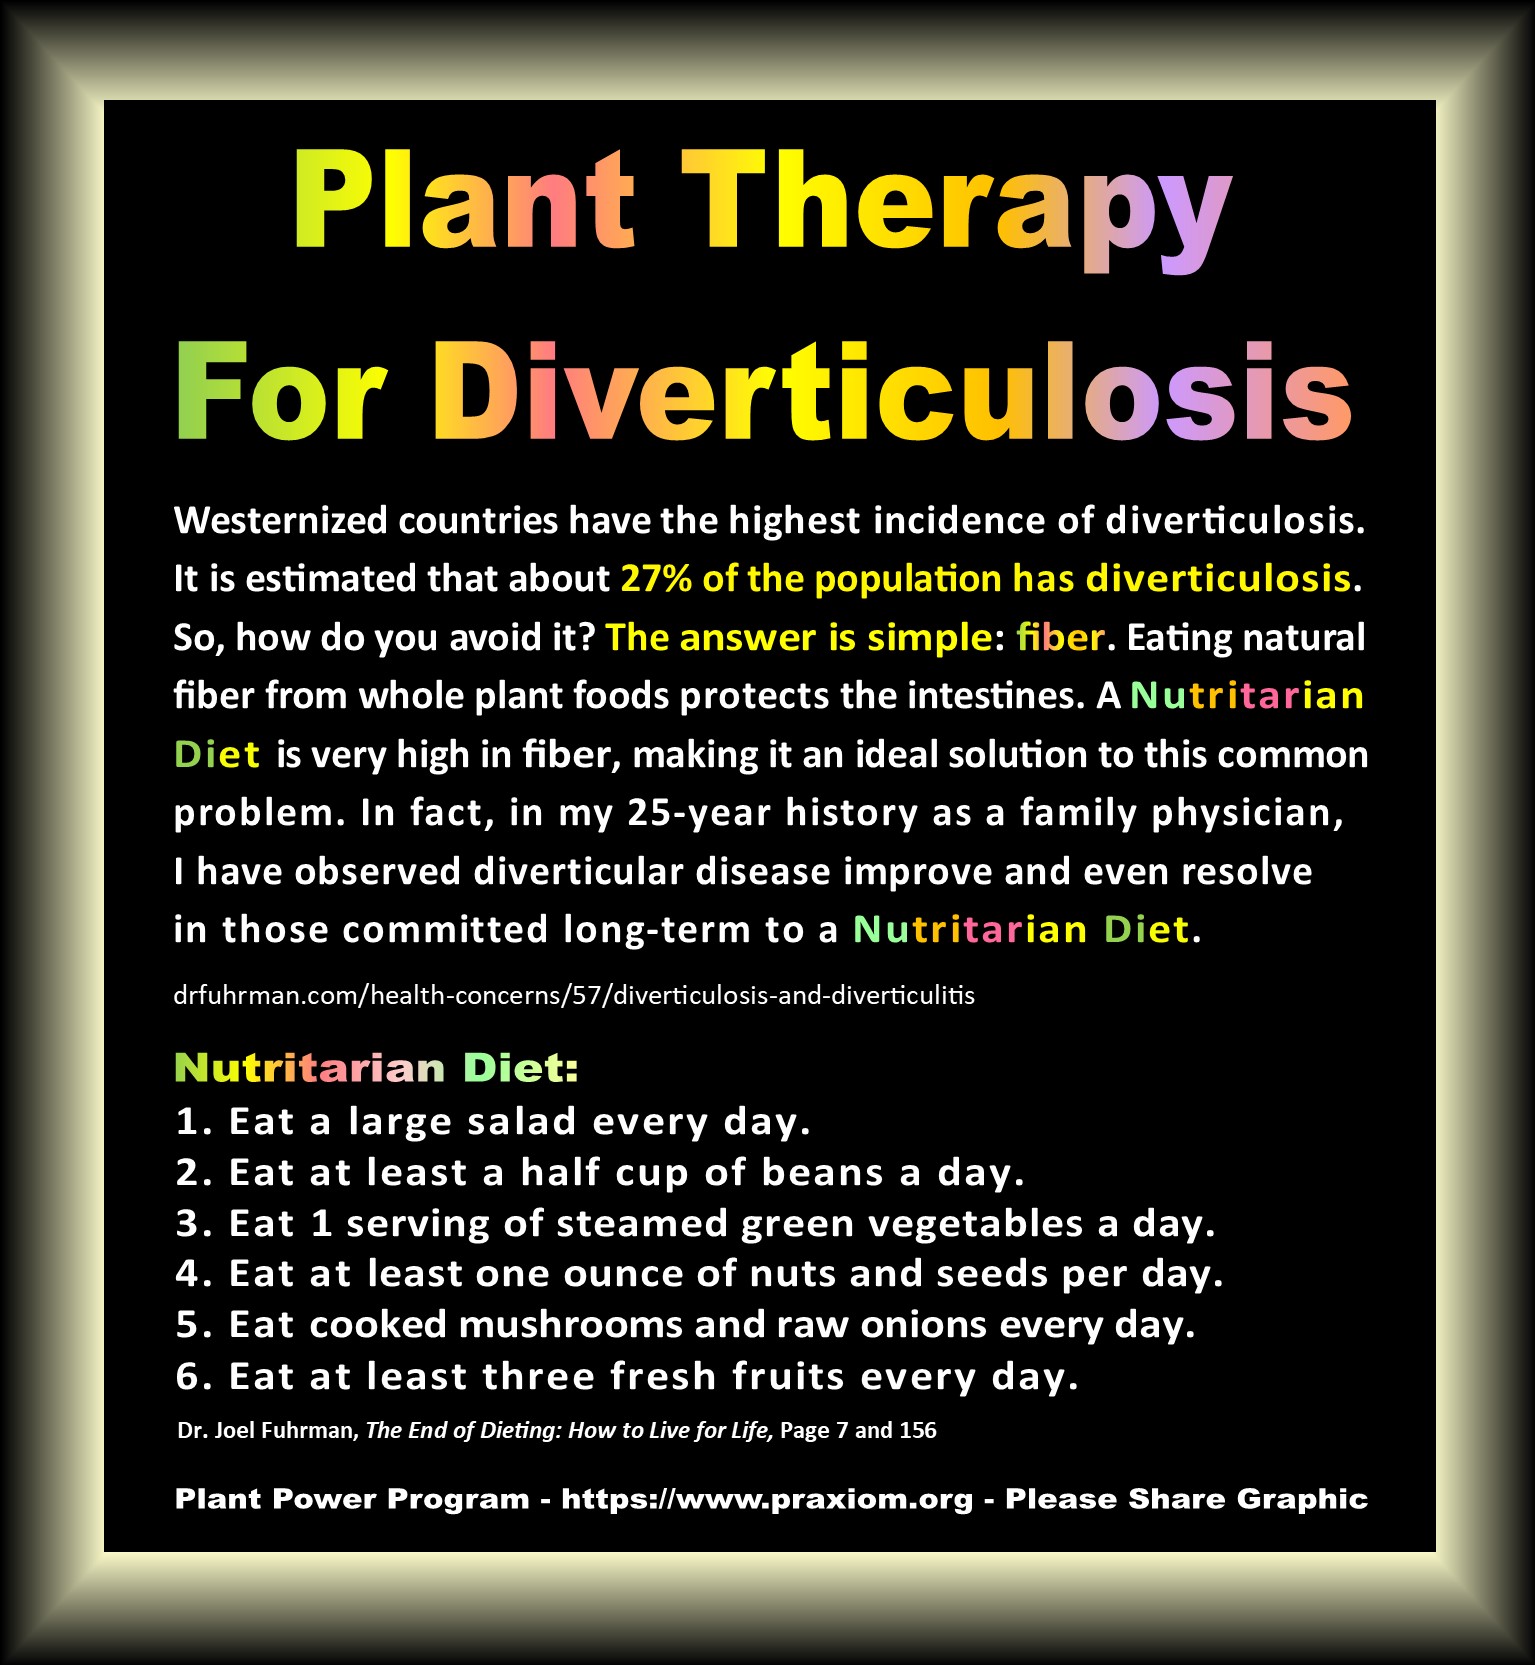 Plant Therapy for Diverticulosis - Dr. Joel Fuhrman